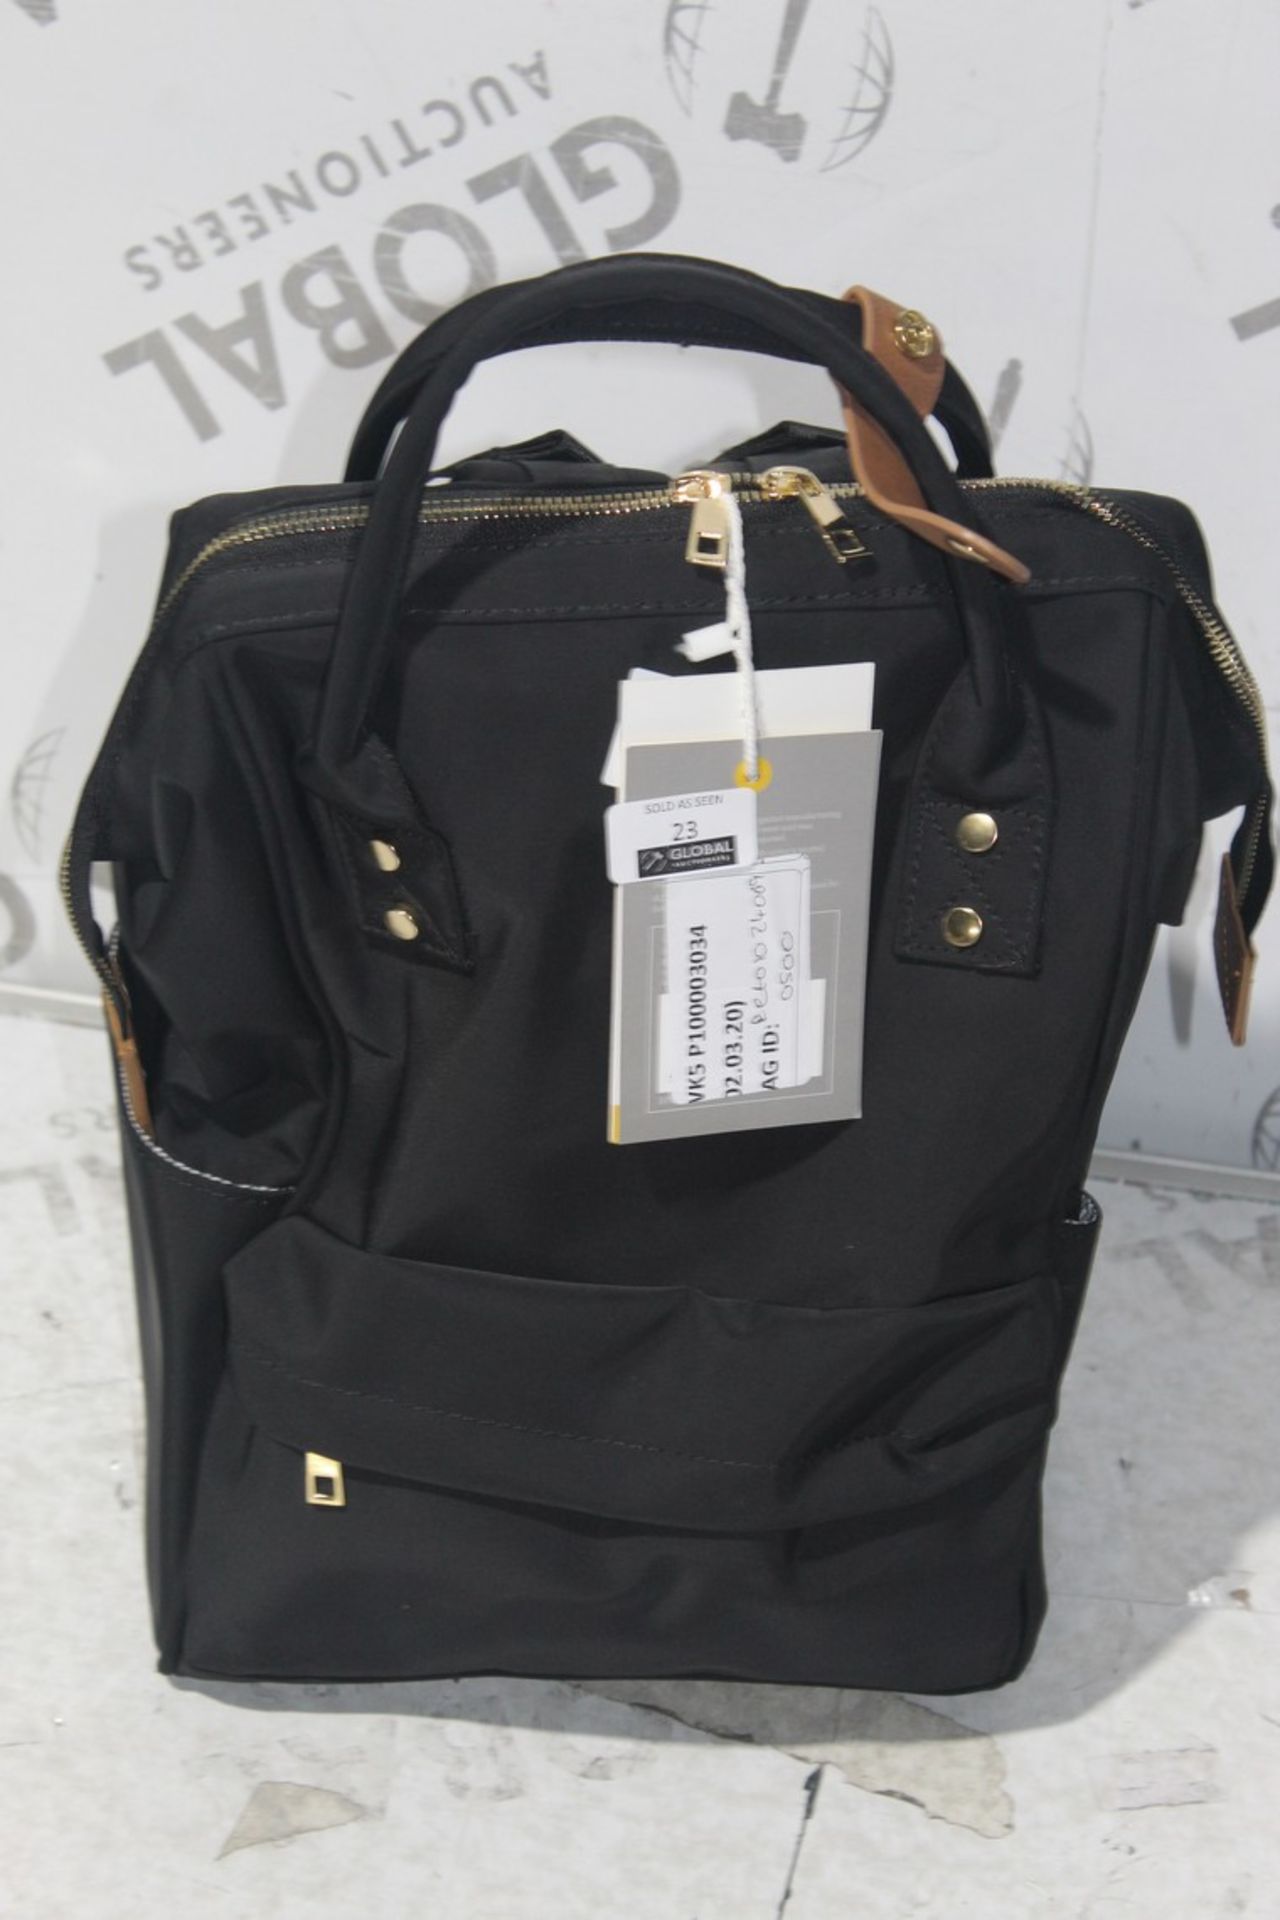 Bababing Black Children's Changing Bag, RRP£50 (RET01024069) (Public Viewings And Appraisals